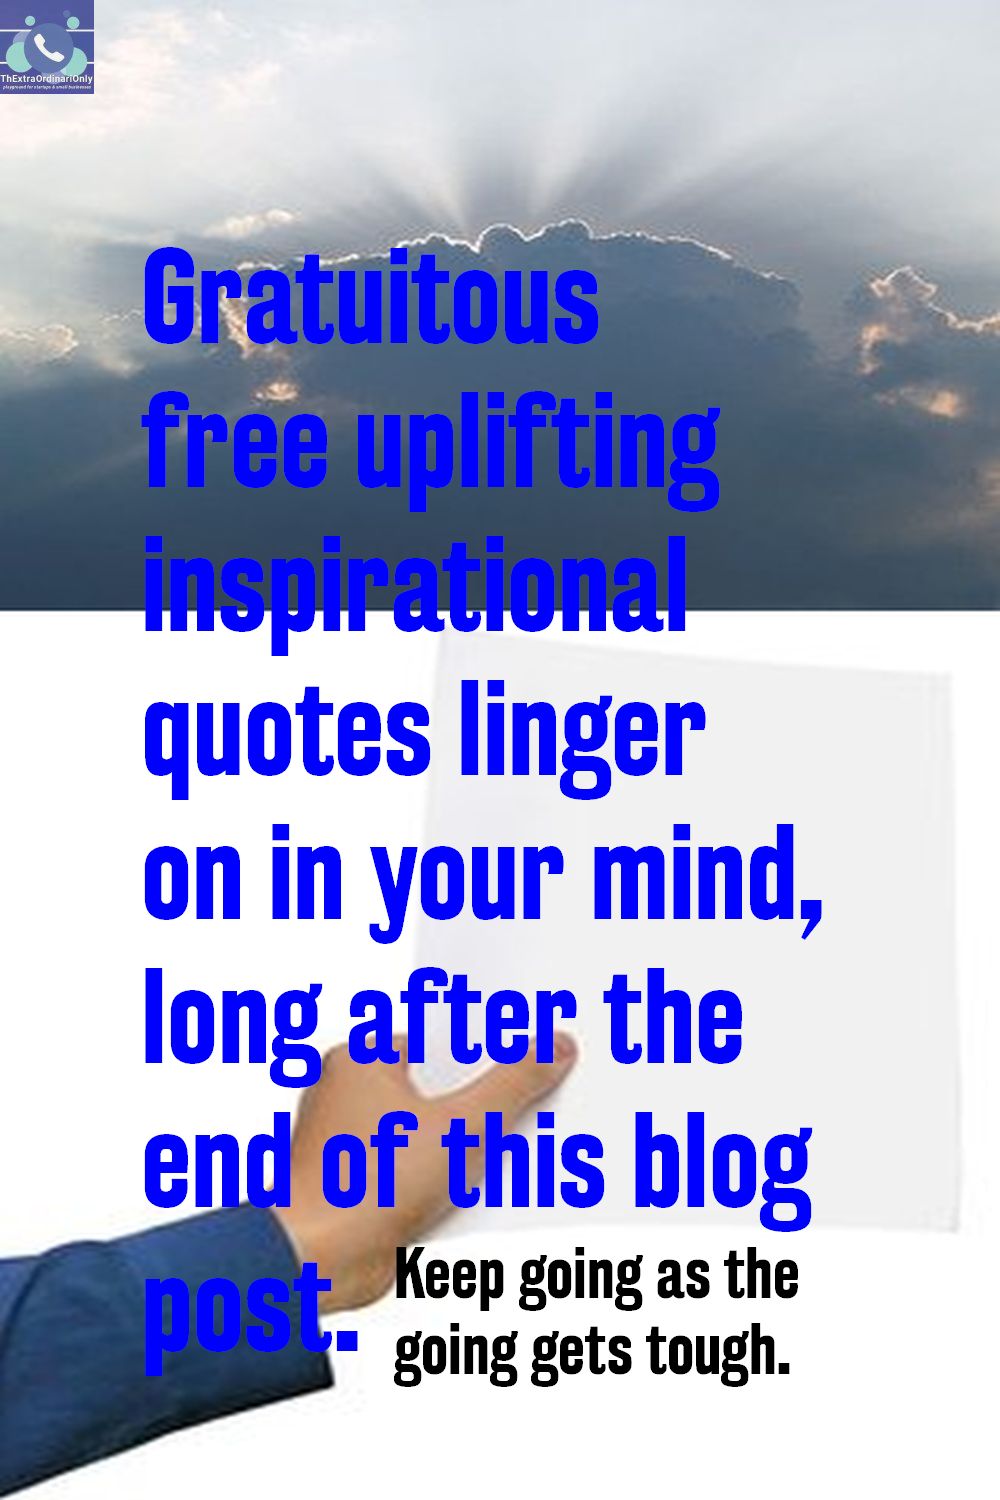 Gratuitous free uplifting inspirational quotes to linger on in your mind